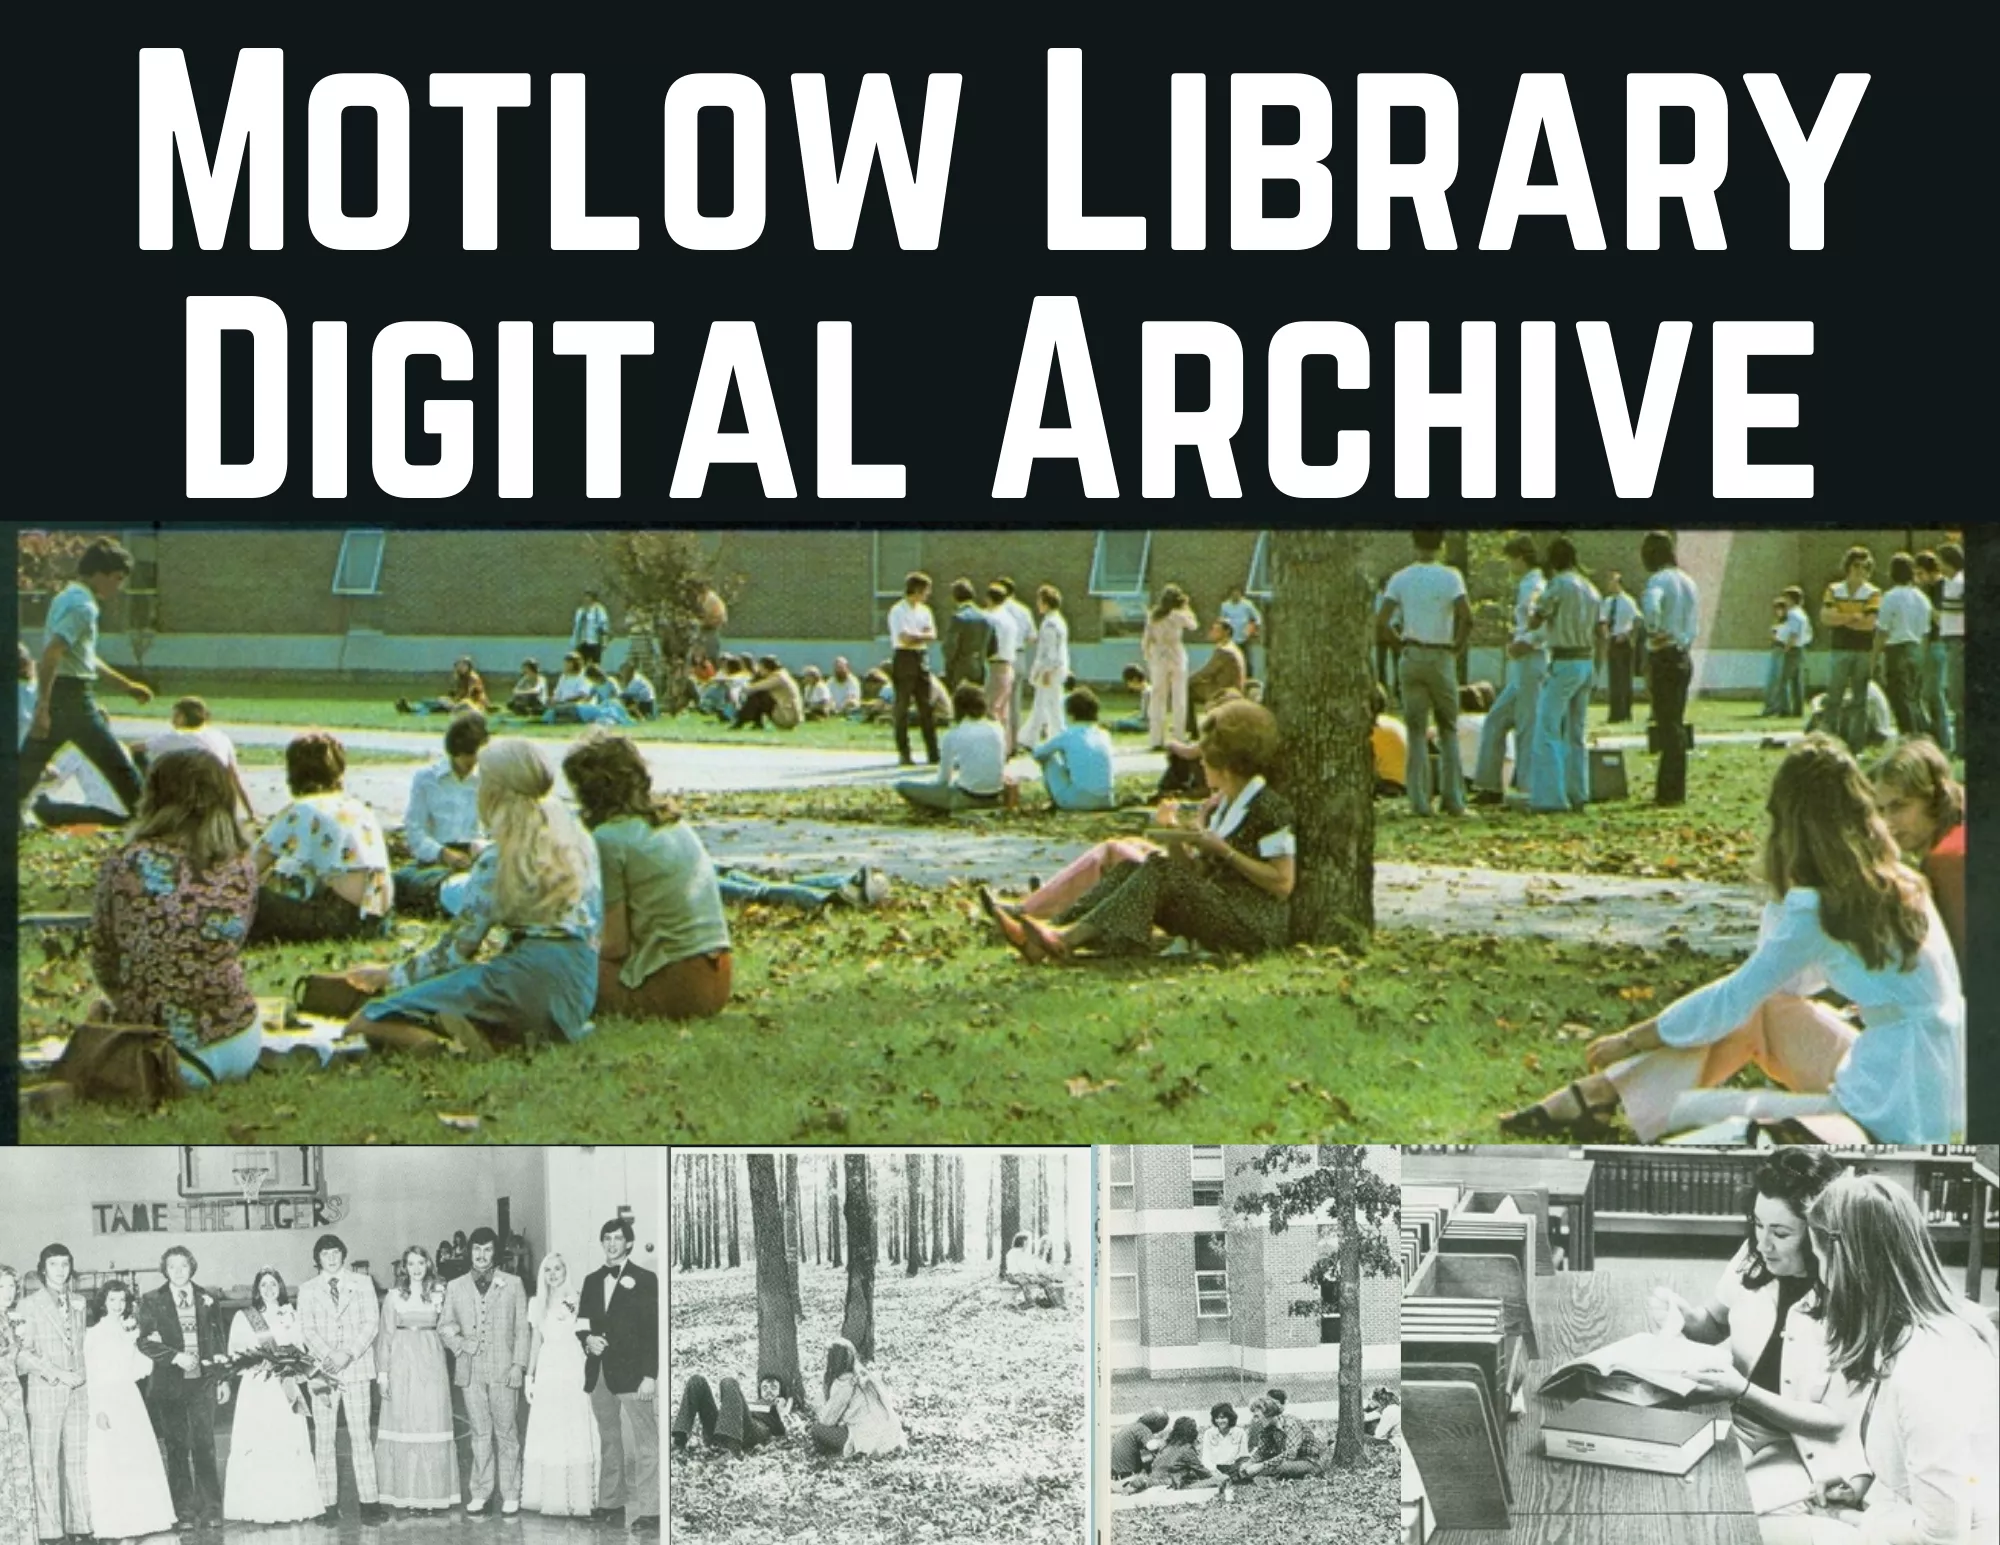 Motlow Library Digital Archive